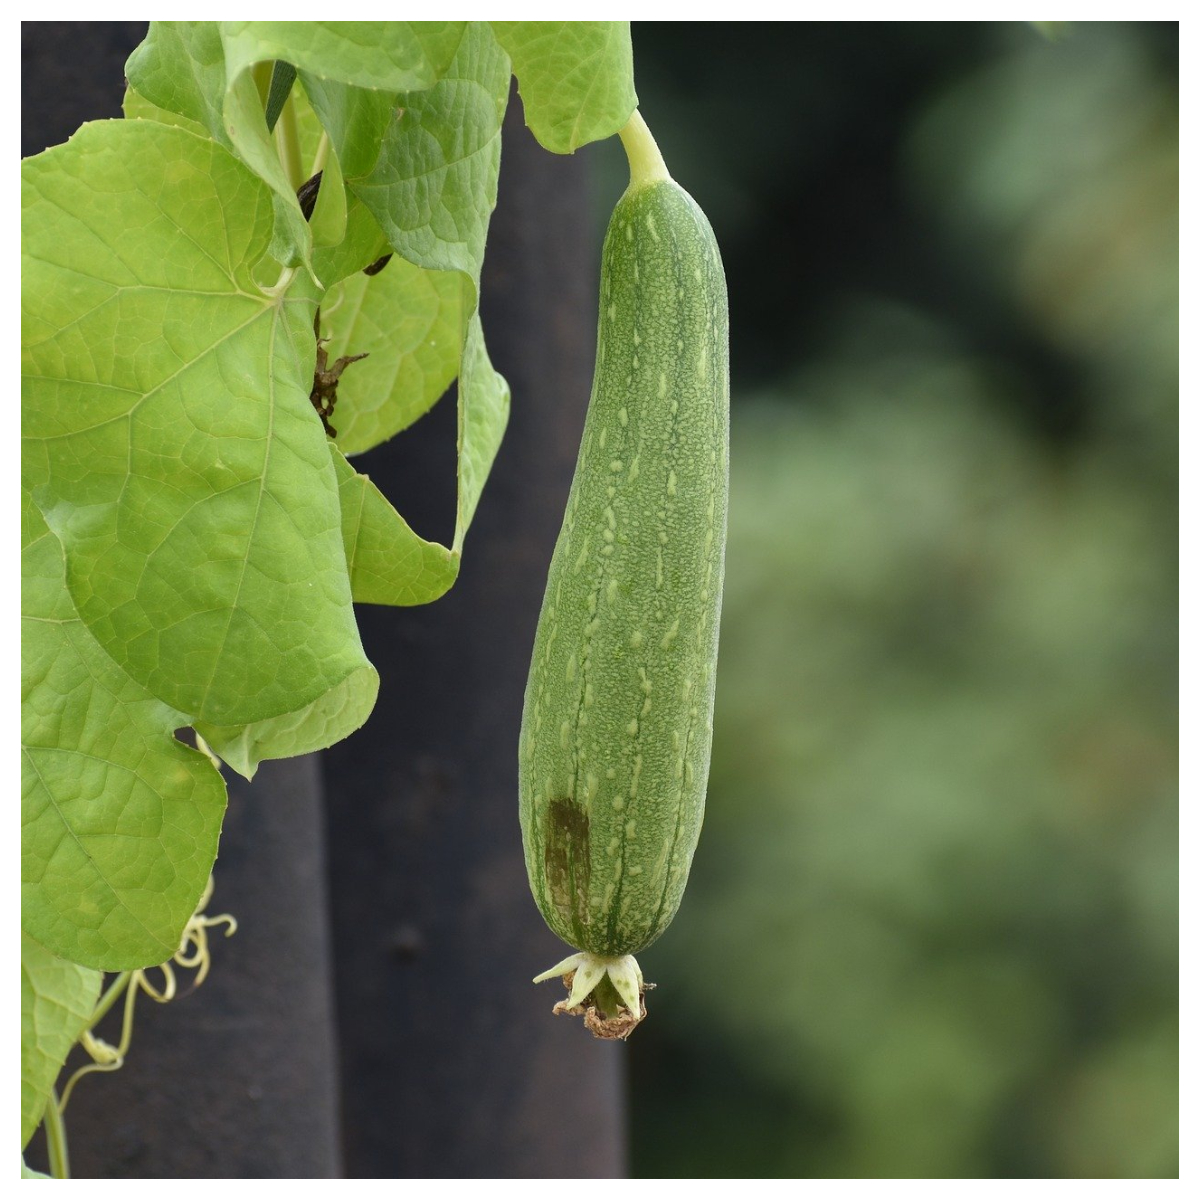 Not a fan of turai or ridge gourd? Here are several health benefits that will make you crave the vegetable